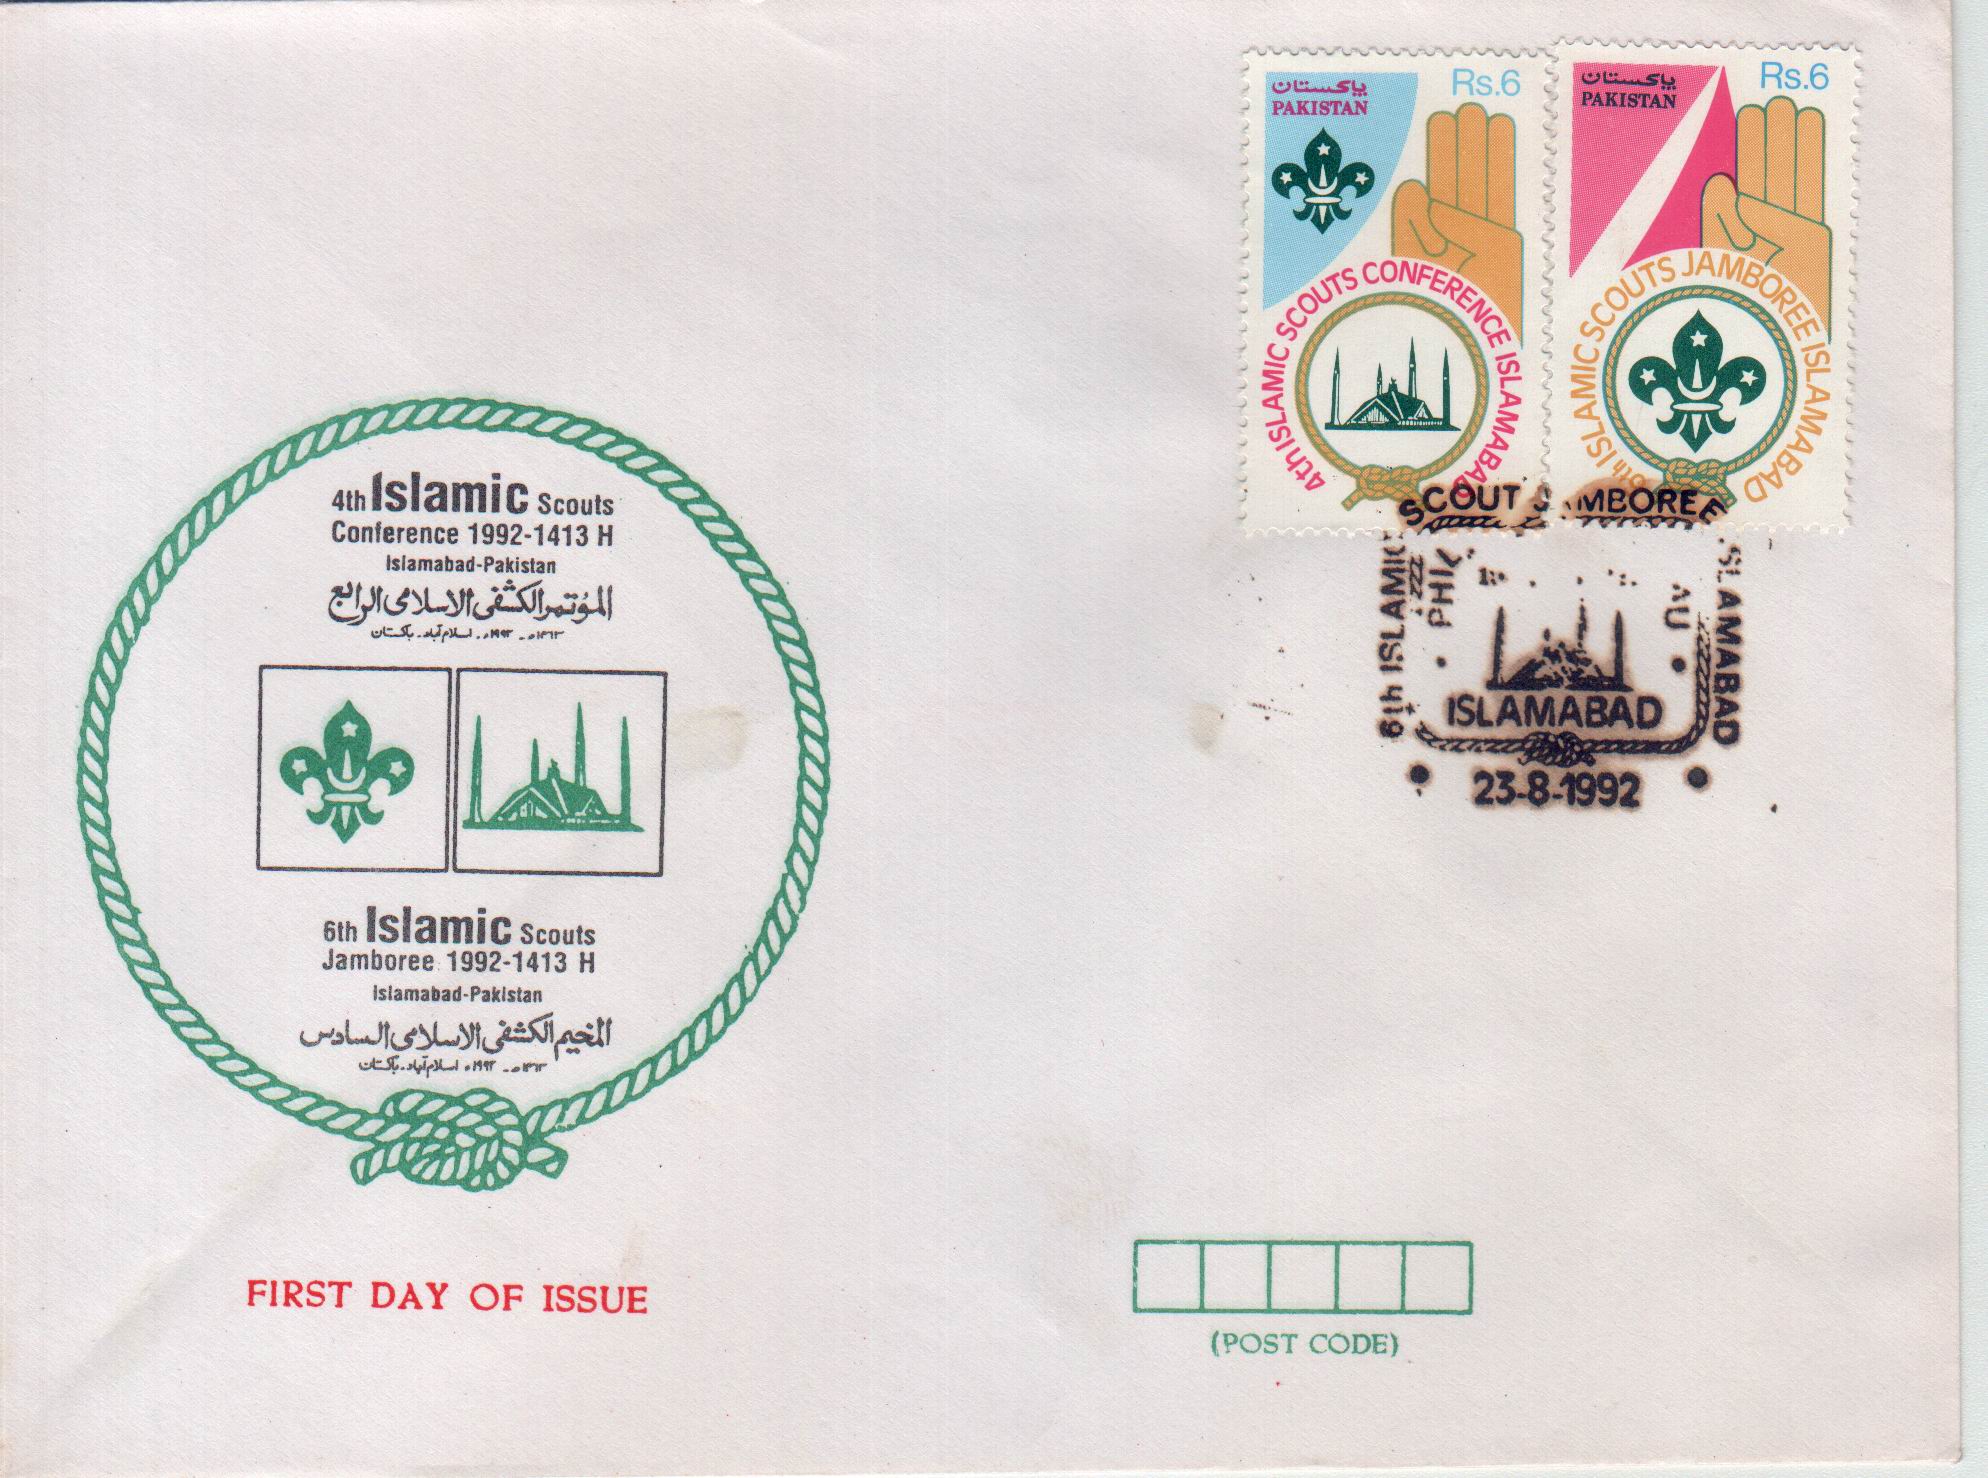 Pakistan Fdc 1992 Brochure & Stamps Islamic Scouts Jamboree - Click Image to Close